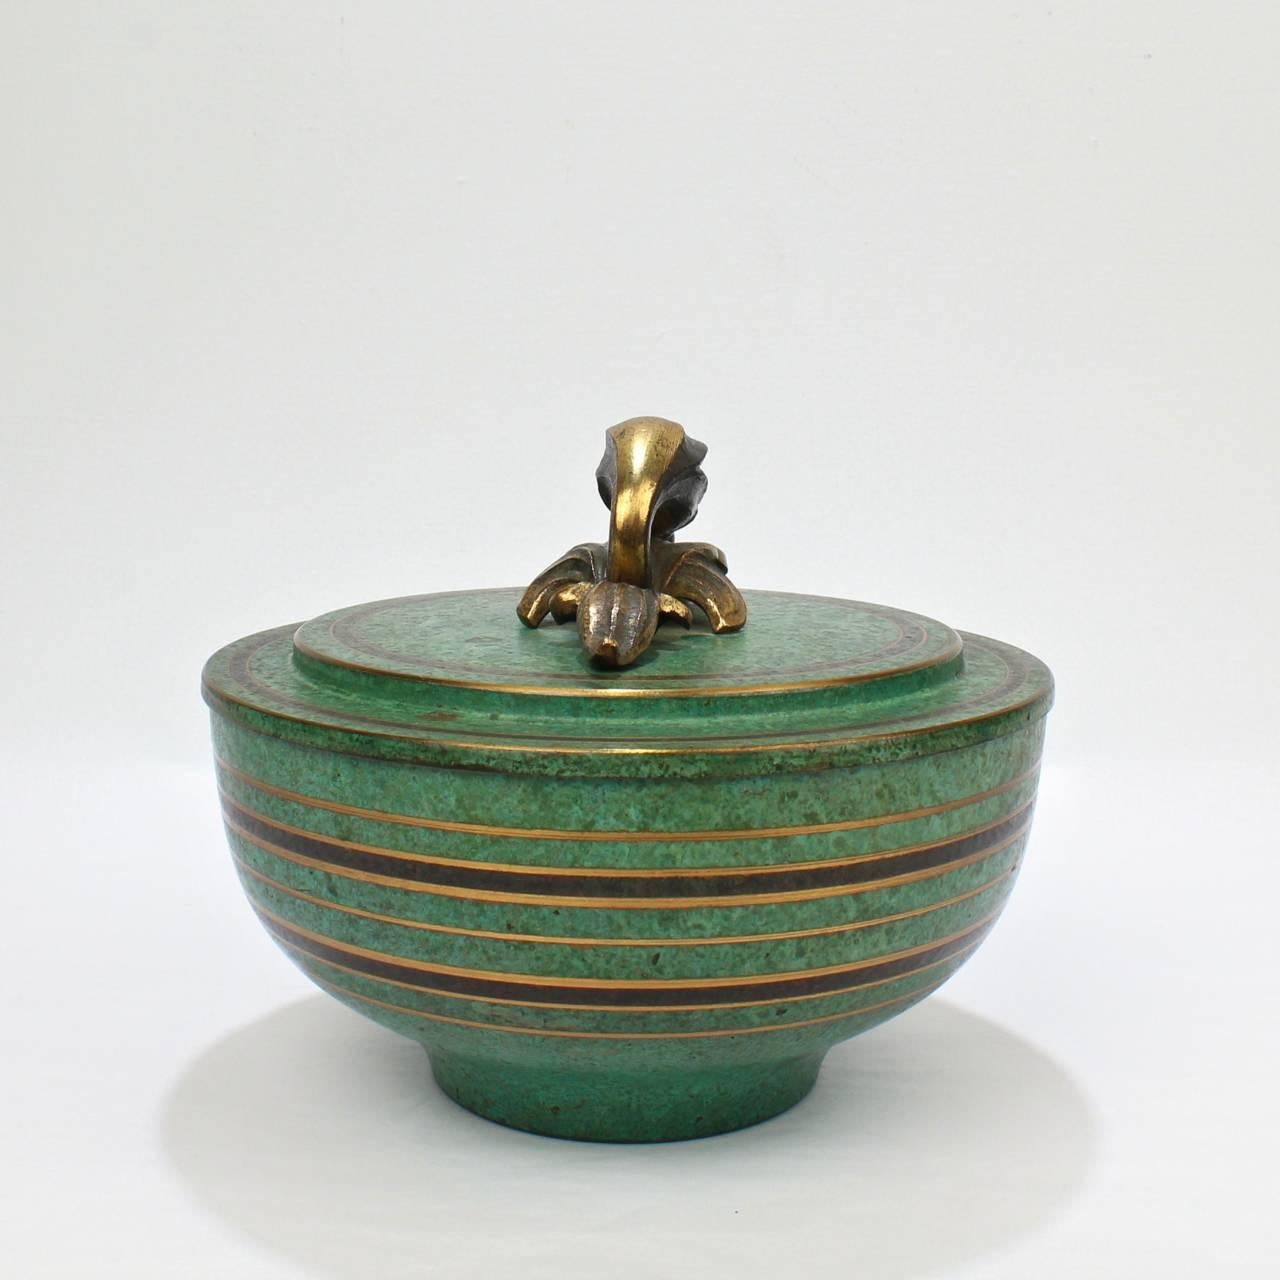 A rare, larger-scale Carl Sorensen covered bronze bowl.

With his typical verdigris finish, vertical stripes, and a stylized floriform bronze finial. 

Base marked with CS, Bronze, Carl Sorensen and 1091.

Diameter: ca. 7 1/2 in.

Items